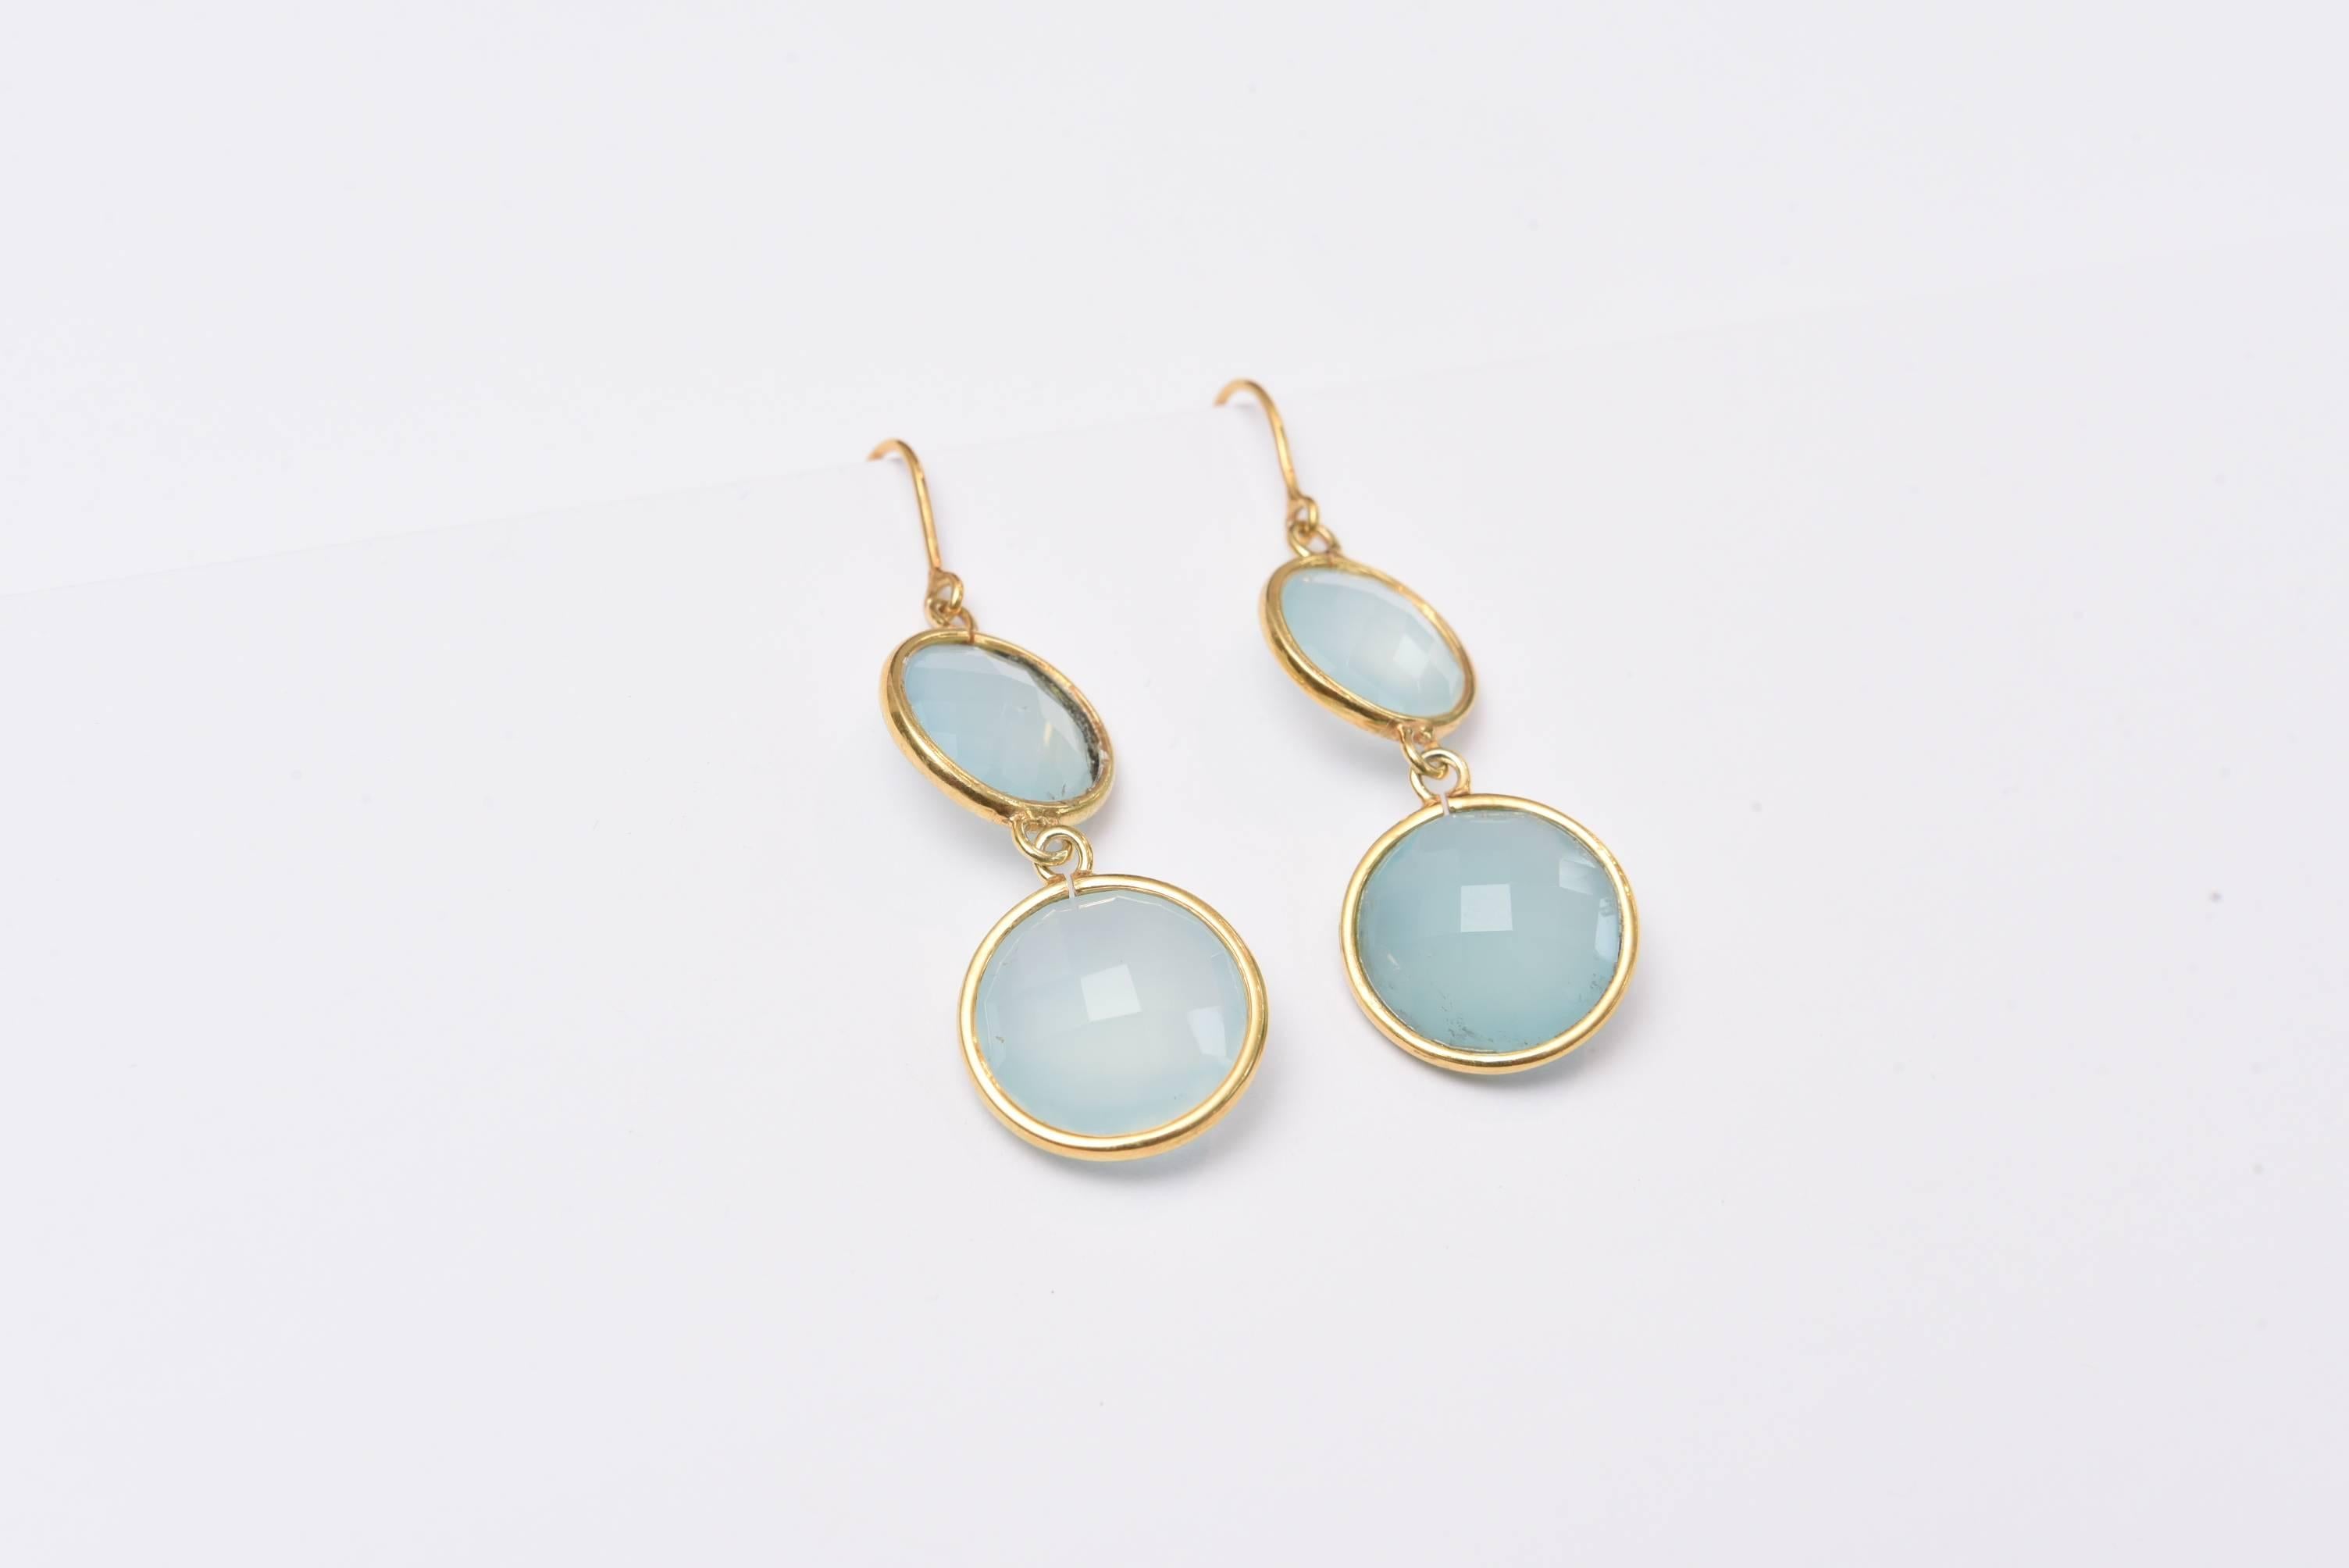 Double drops of double-faceted chalcedony bordered in 18K gold.  One hangs forward and the other sideways offering a nice dimension and movement when worn.  18k French wires for pierced ears.
